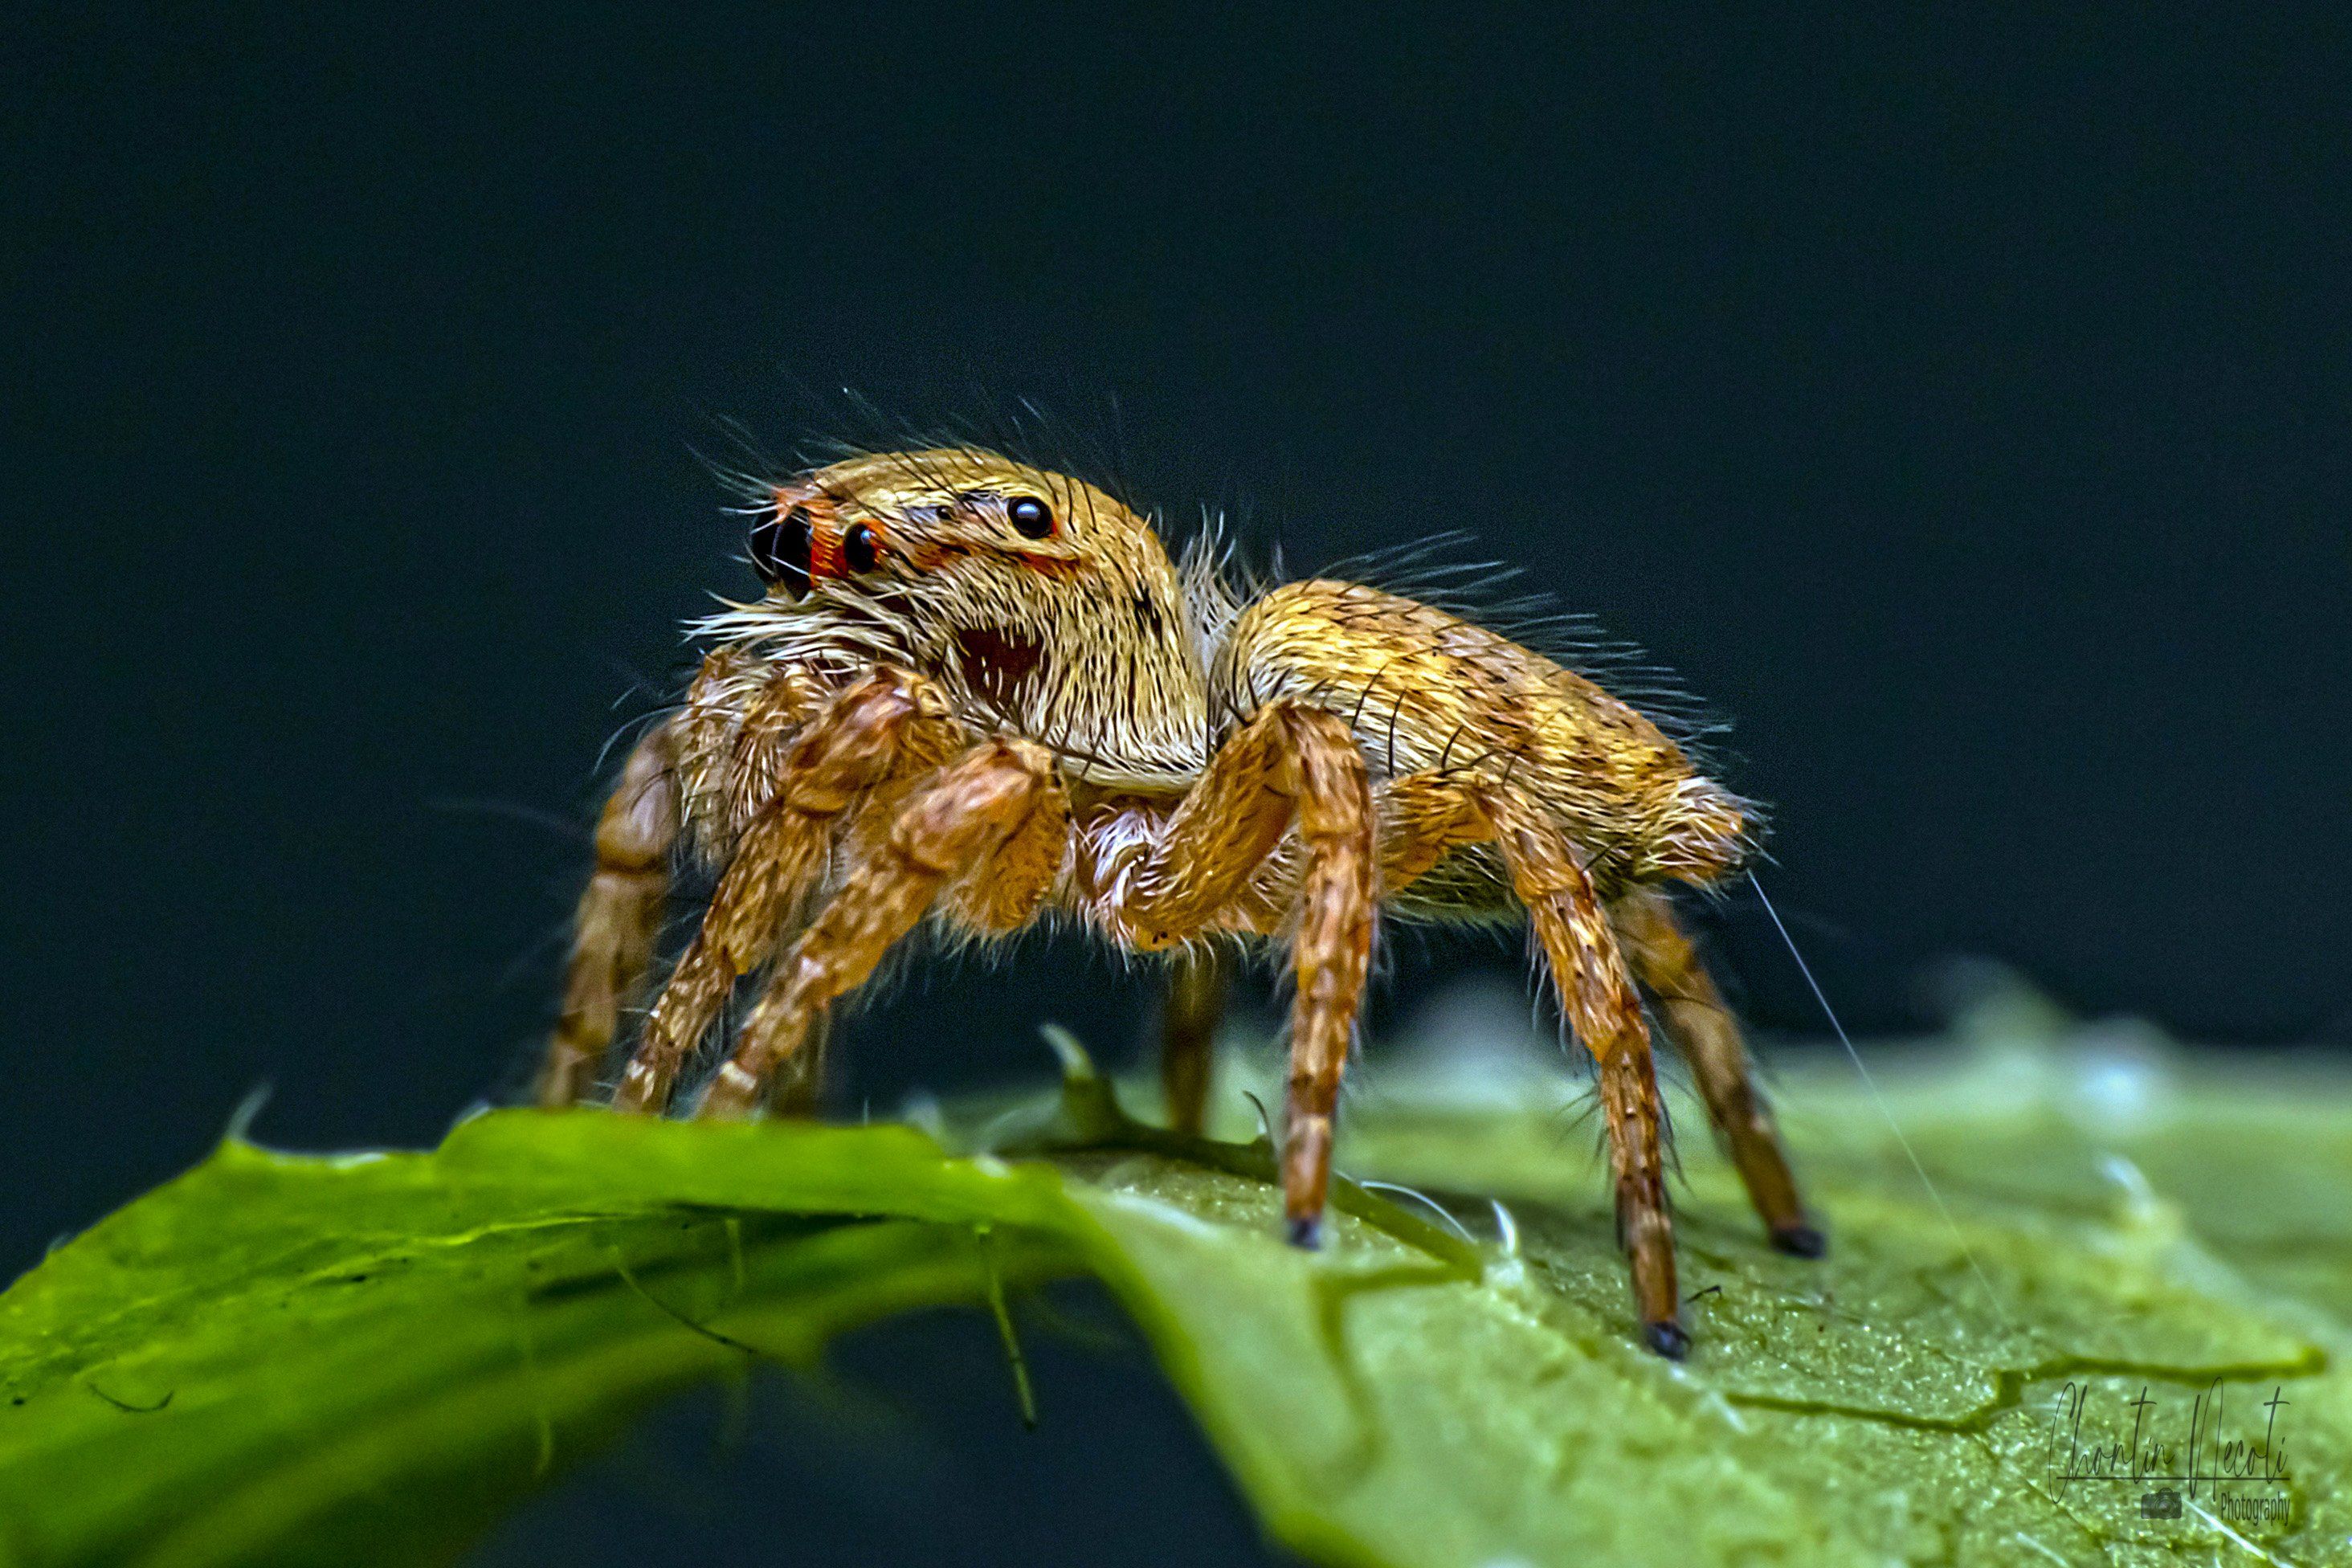 spider, macro, close up, small, outdoor, wildlife, legs, eyes, jumping, nature, natural, leaf, forest, beautiful, NeCoTi ChonTin